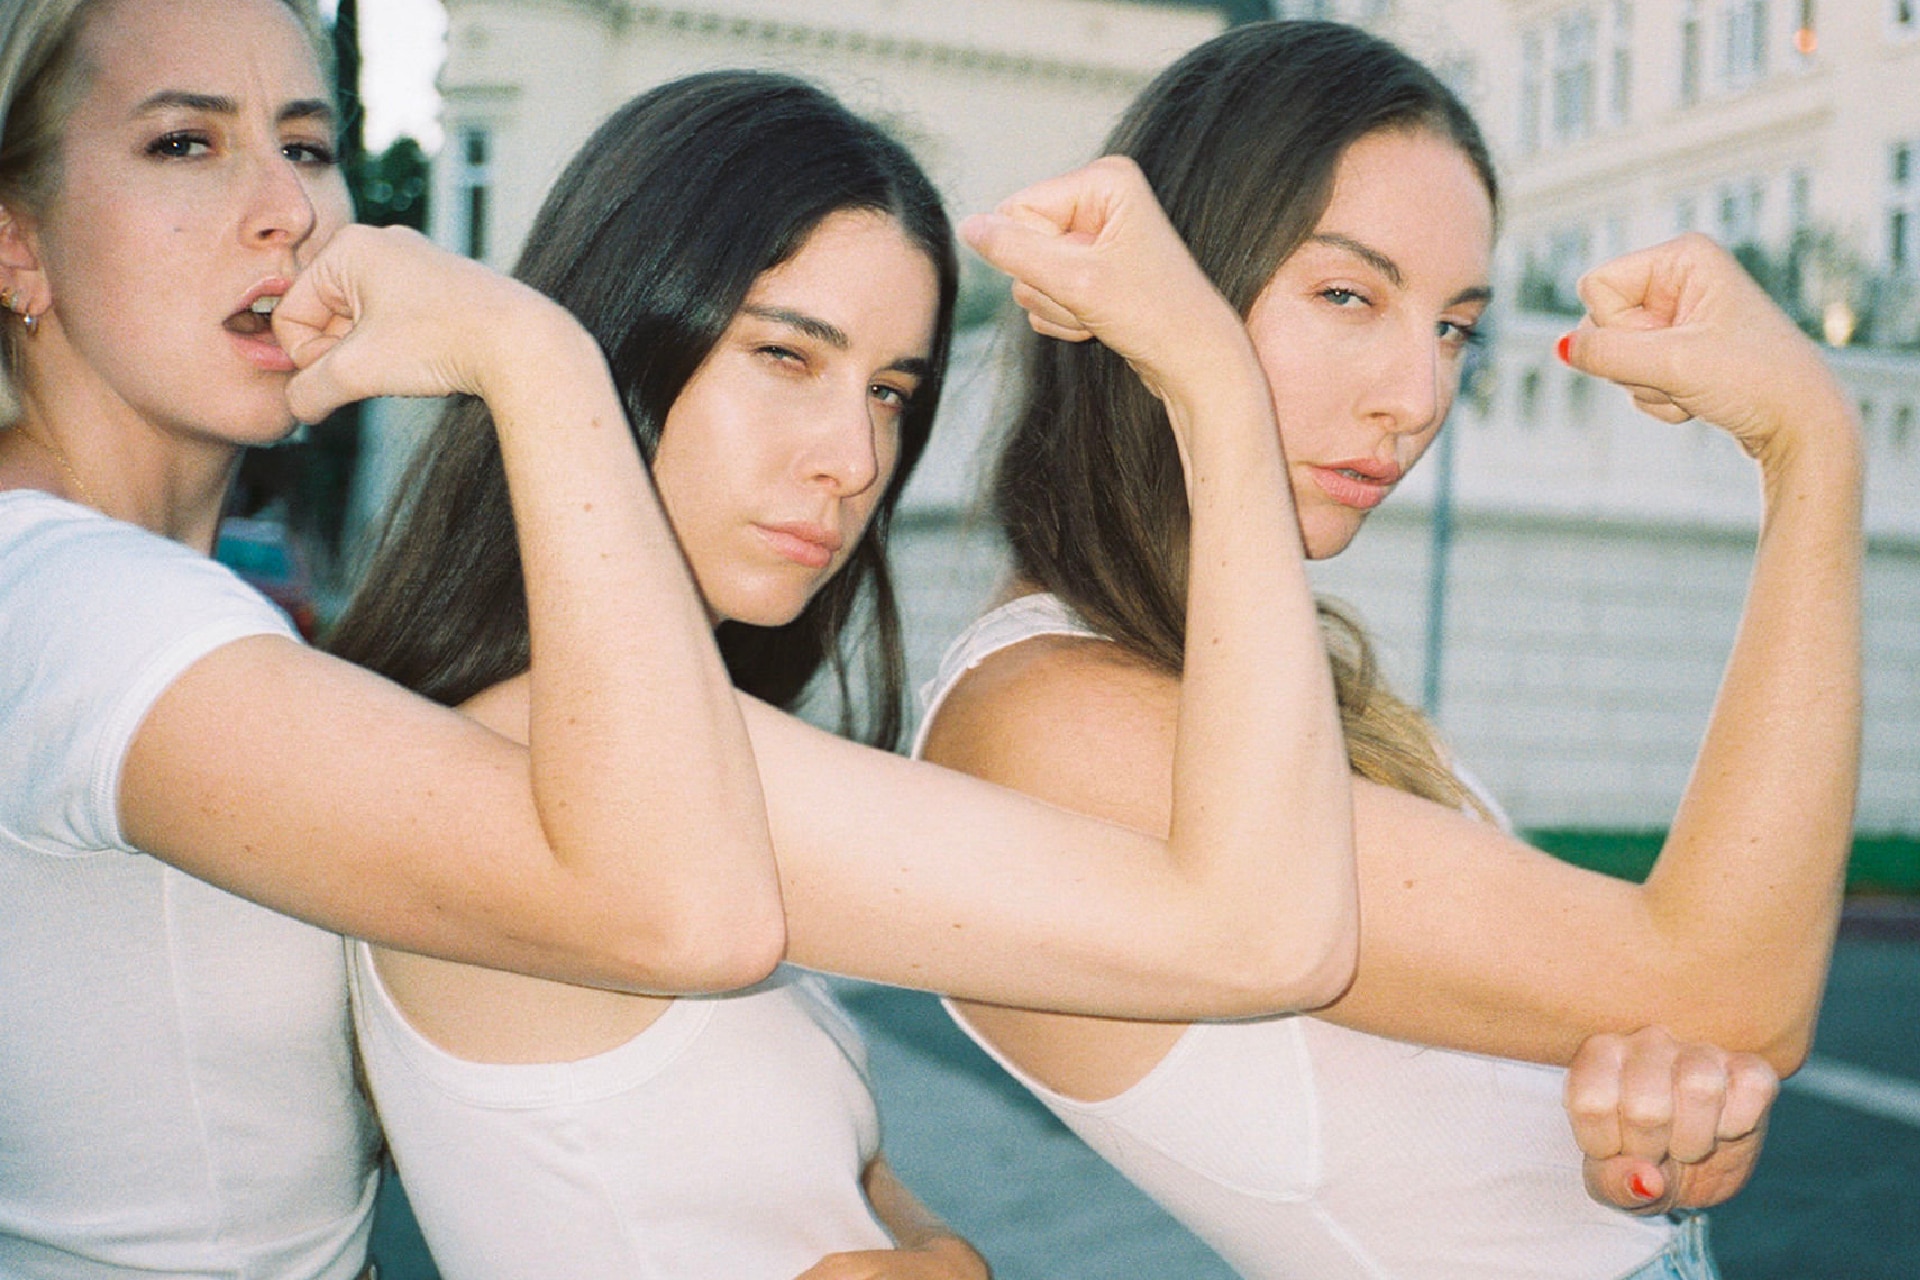 The Haim Sisters Show Off Their Dance Moves in New Louis Vuitton Video – WWD